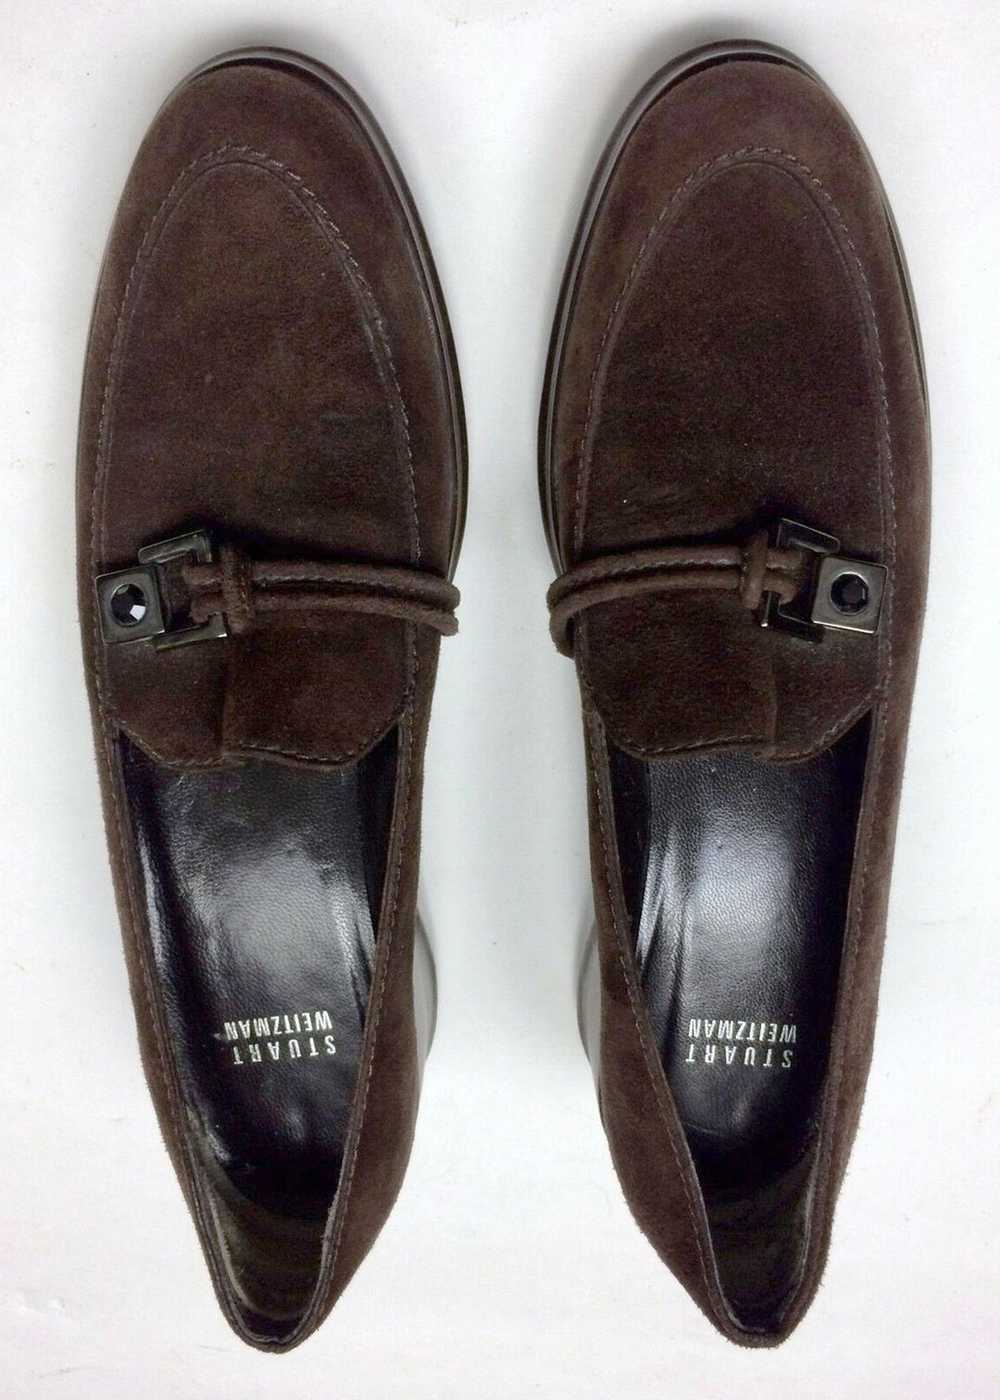 Stuart Weitzman Size 7N Brown Suede Loafers - image 2